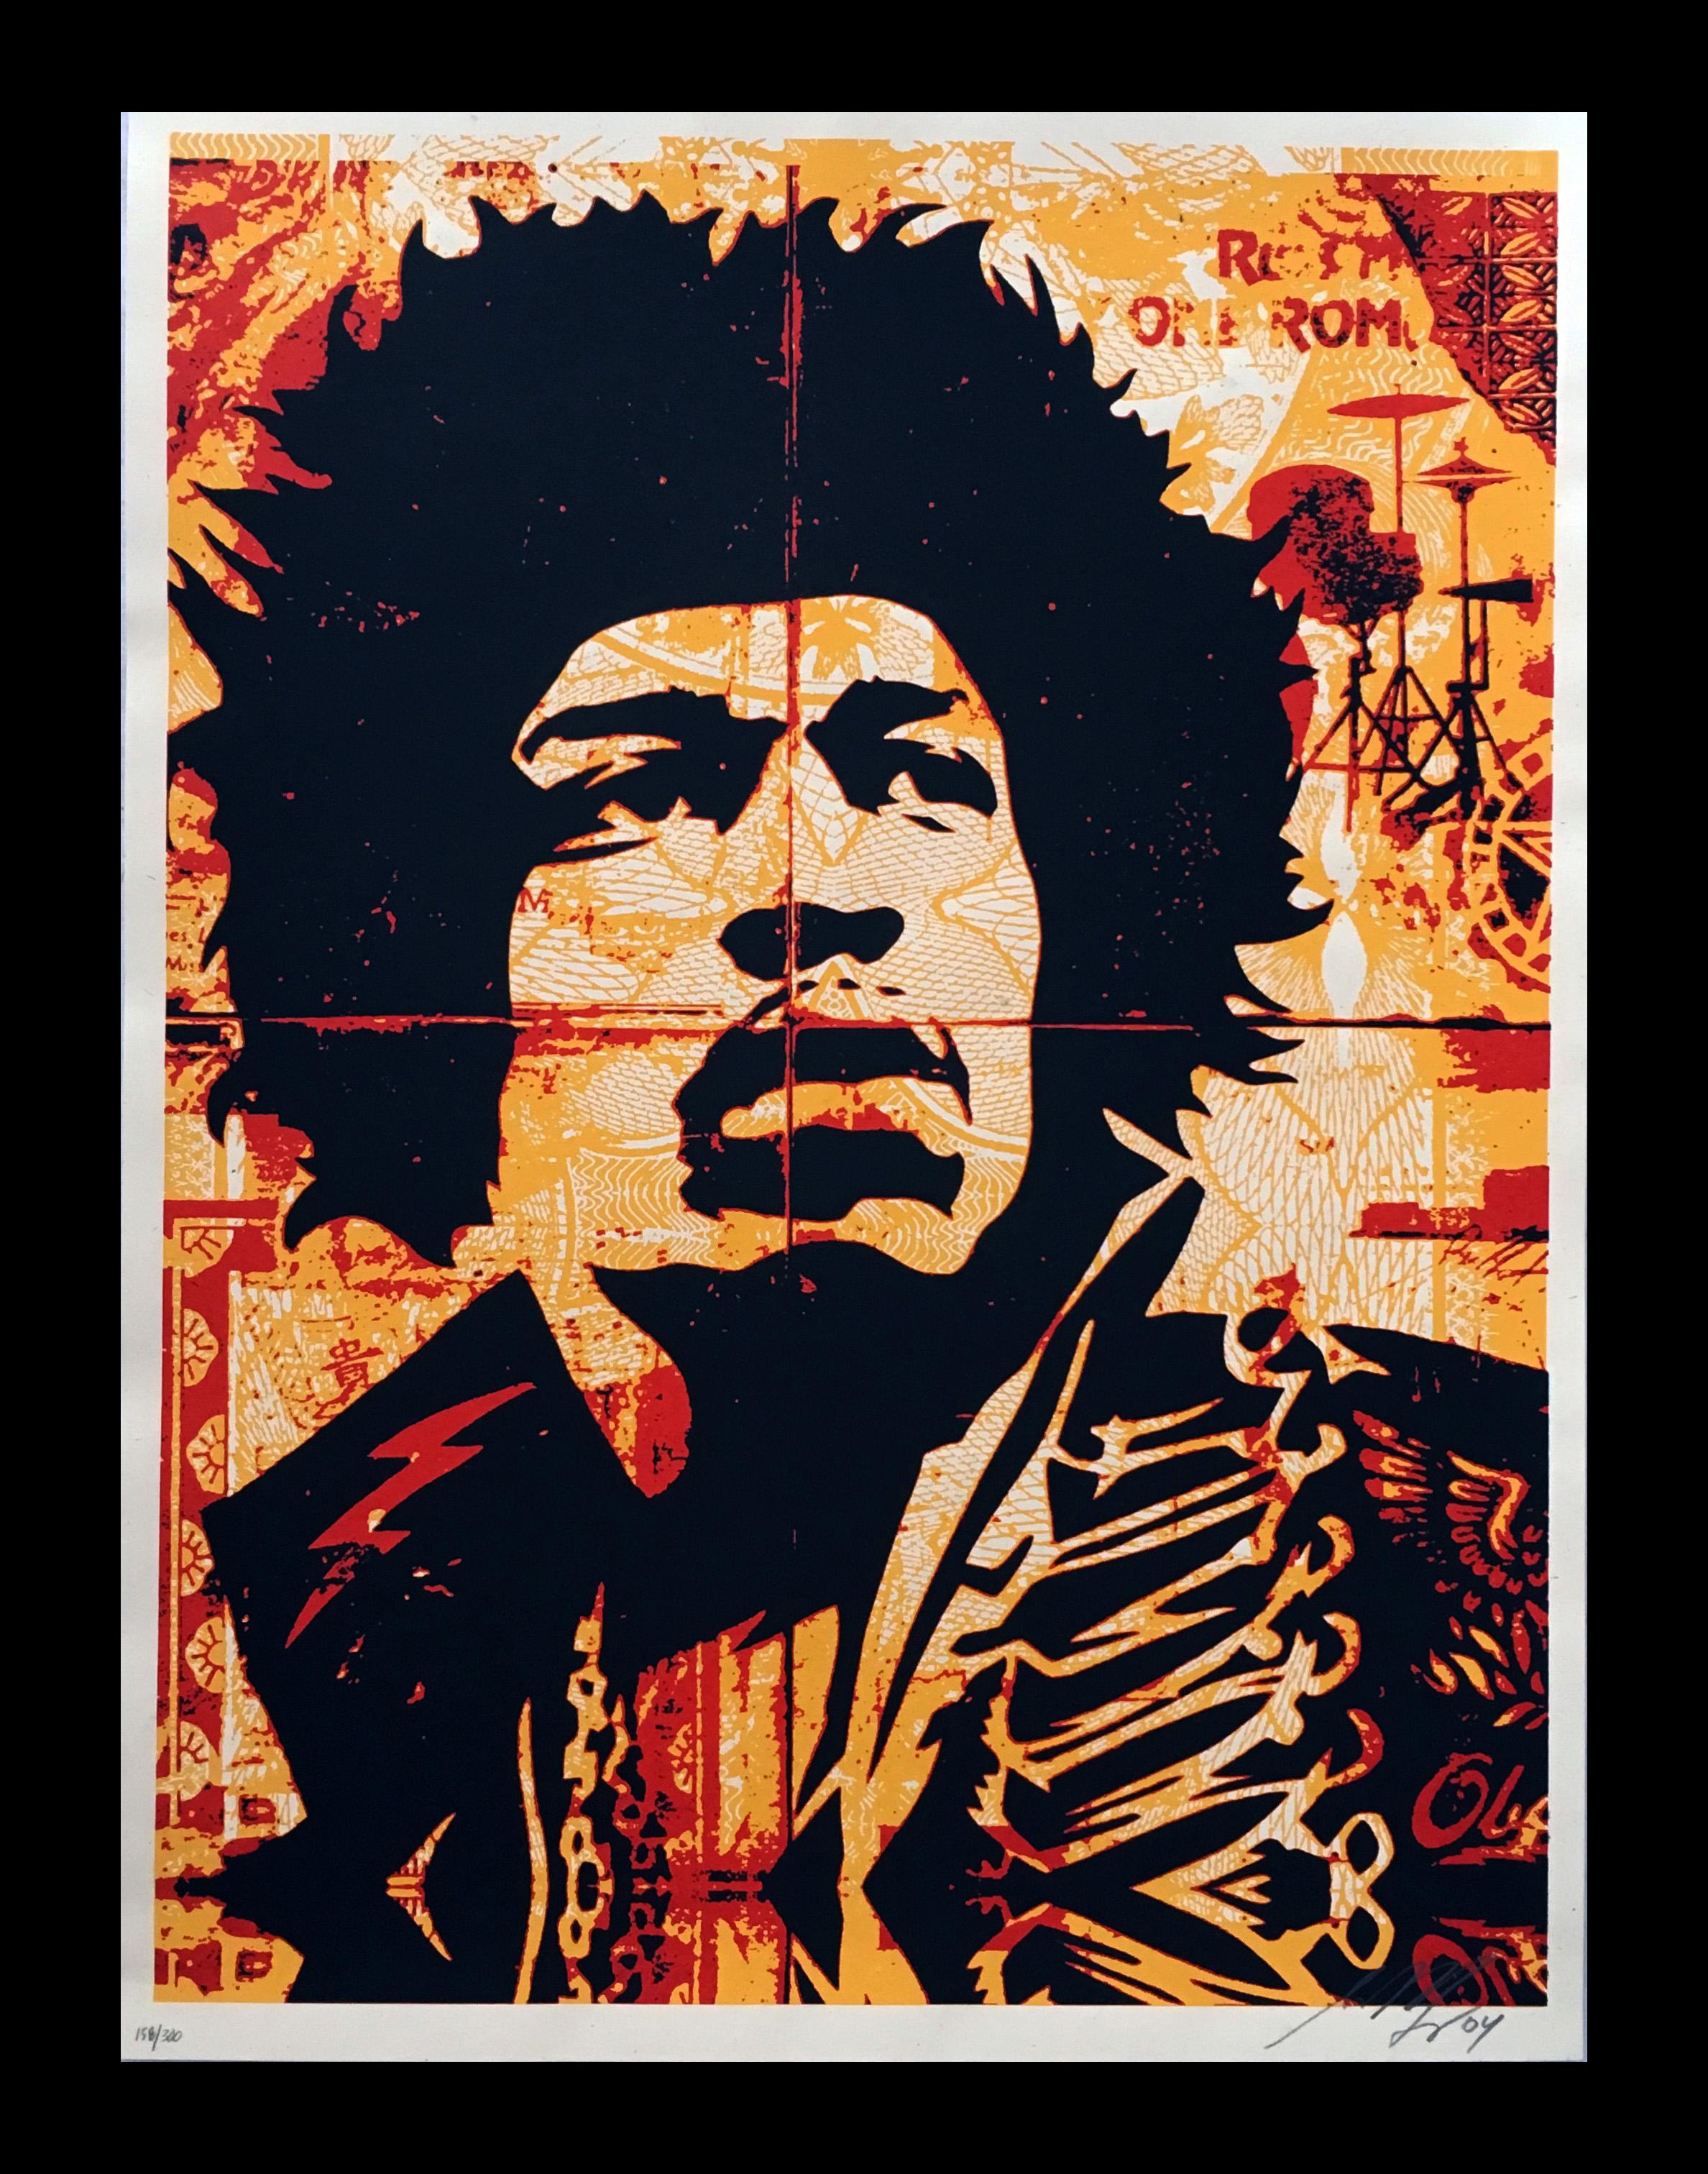 Shepard Fairey Hendrix screen-print, 2004

Screen Print; 2004
18 x 24 inches
Edition of 300 (158/300)
Excellent condition with the exception of some very minor traces of handling. Stored flat in an archival setting. 
Signed, numbered, and dated in